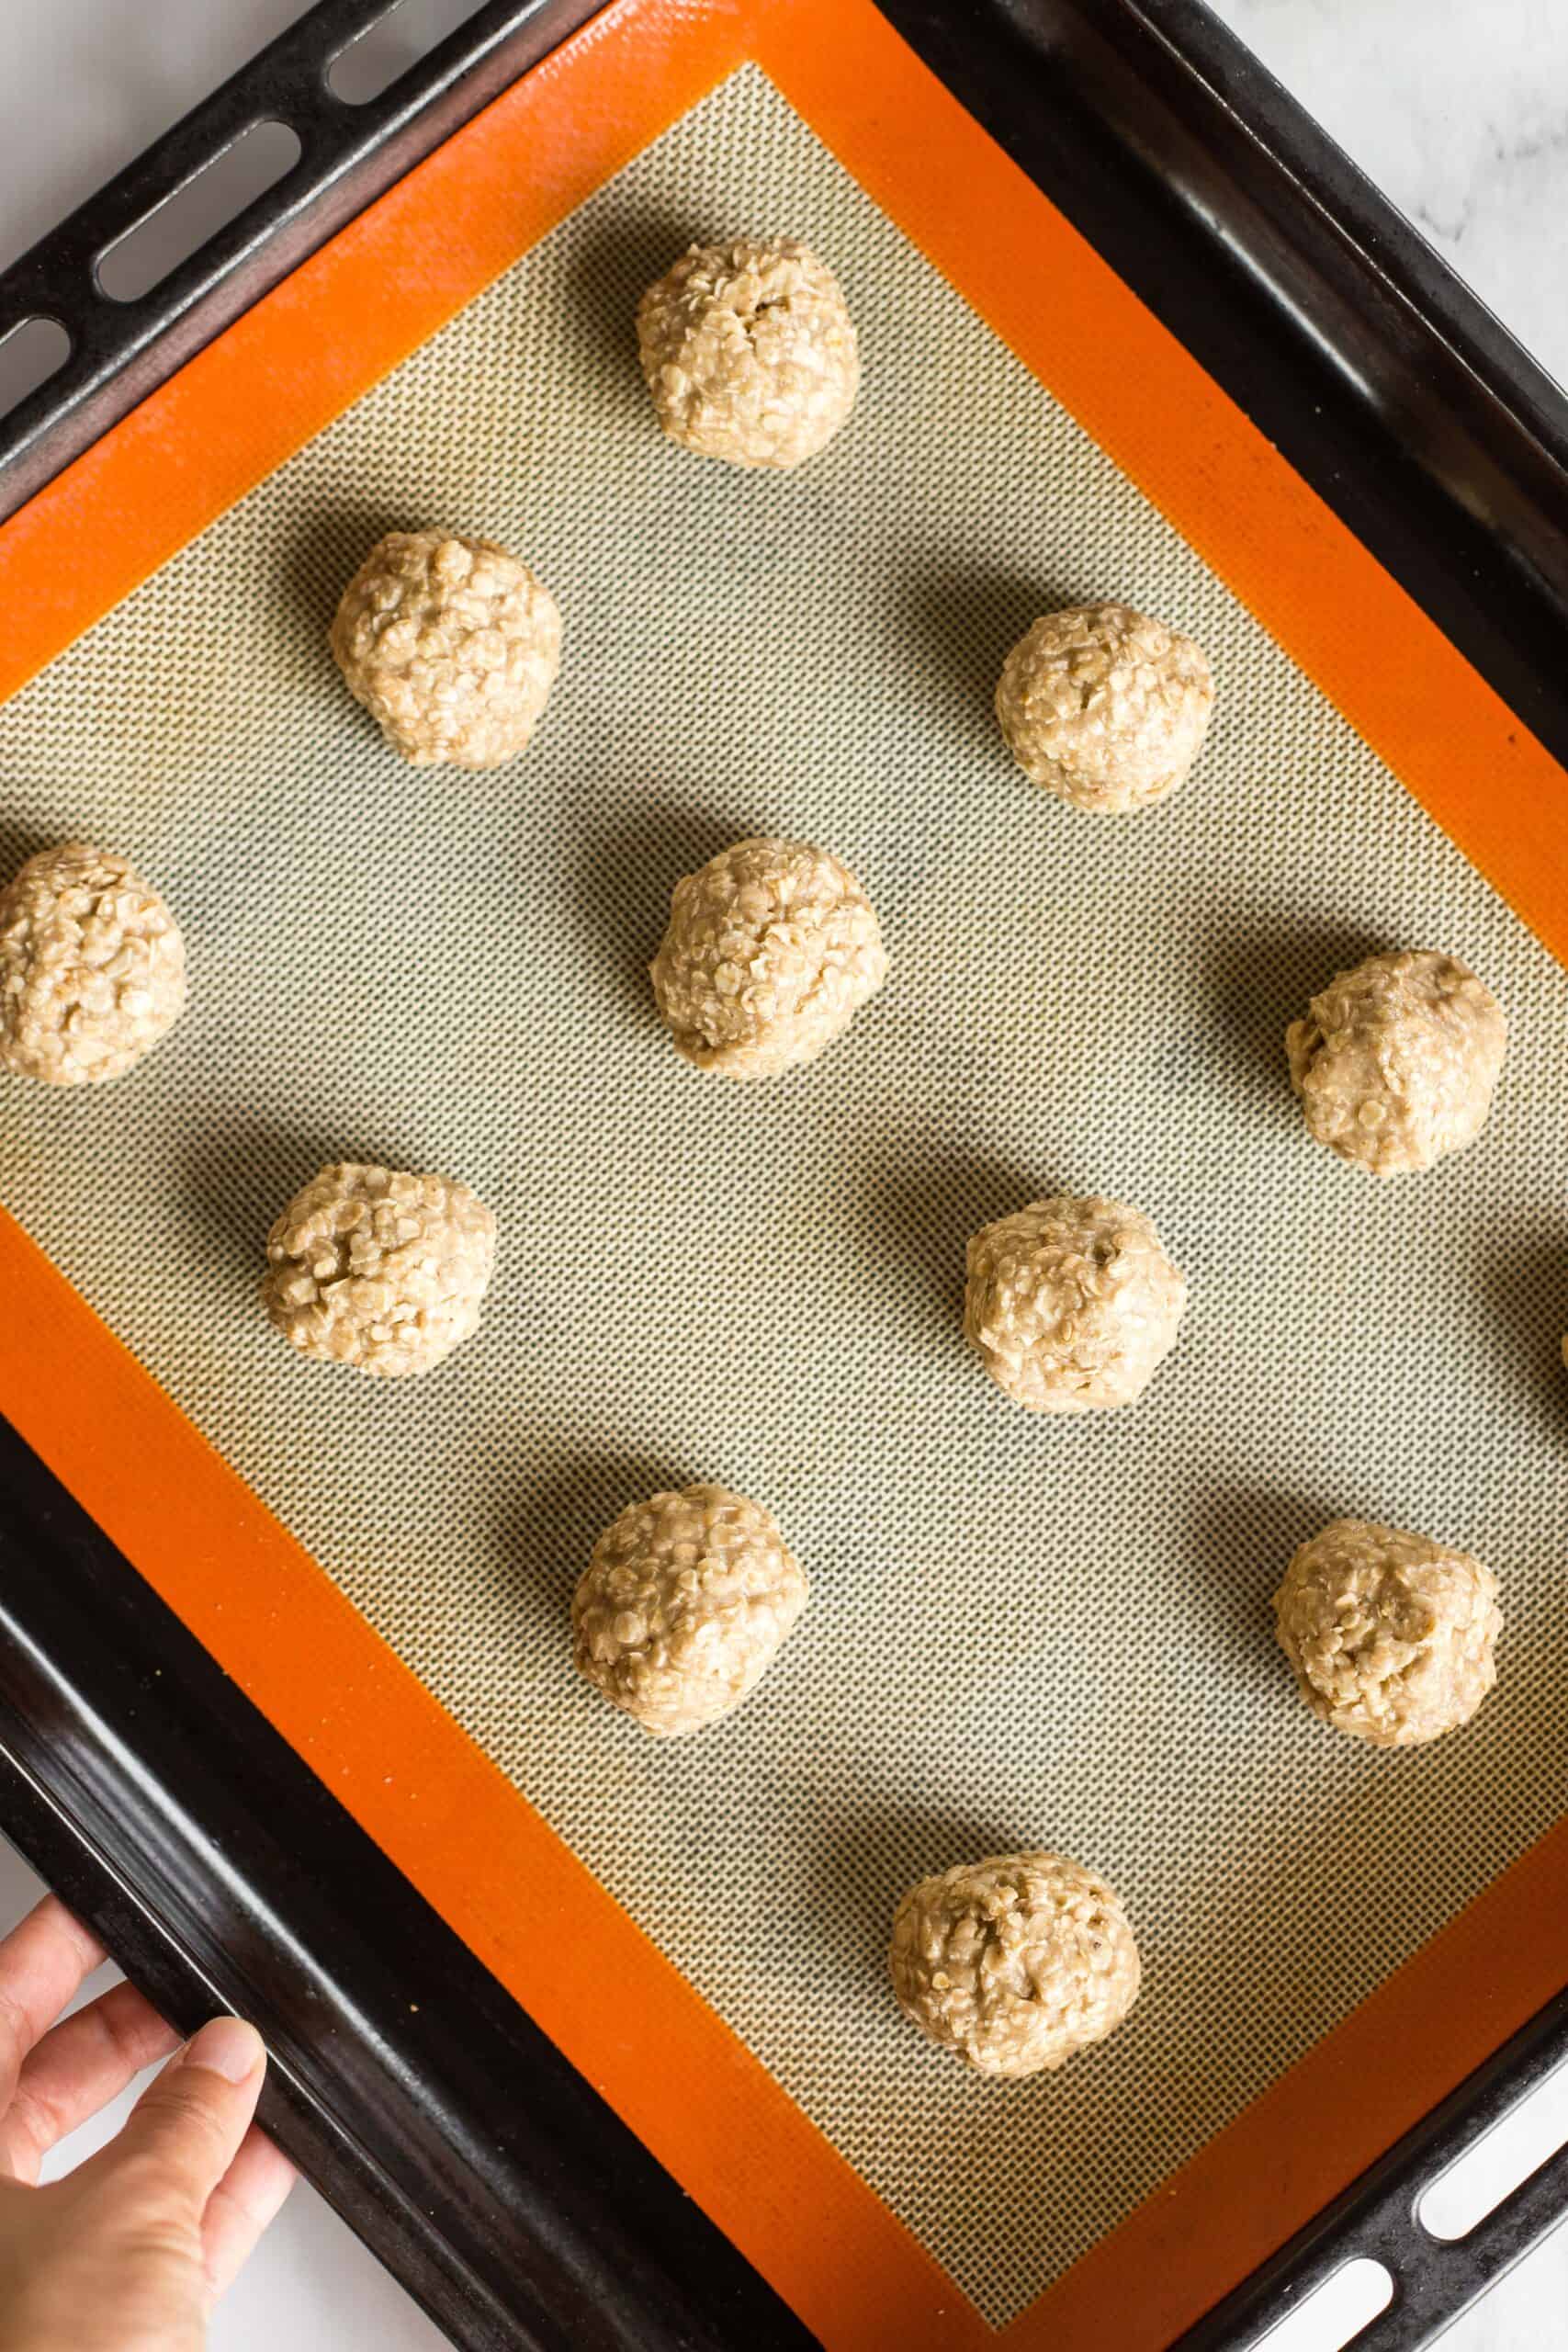 Holding a silpat-lined cookie sheet with cookie dough balls.